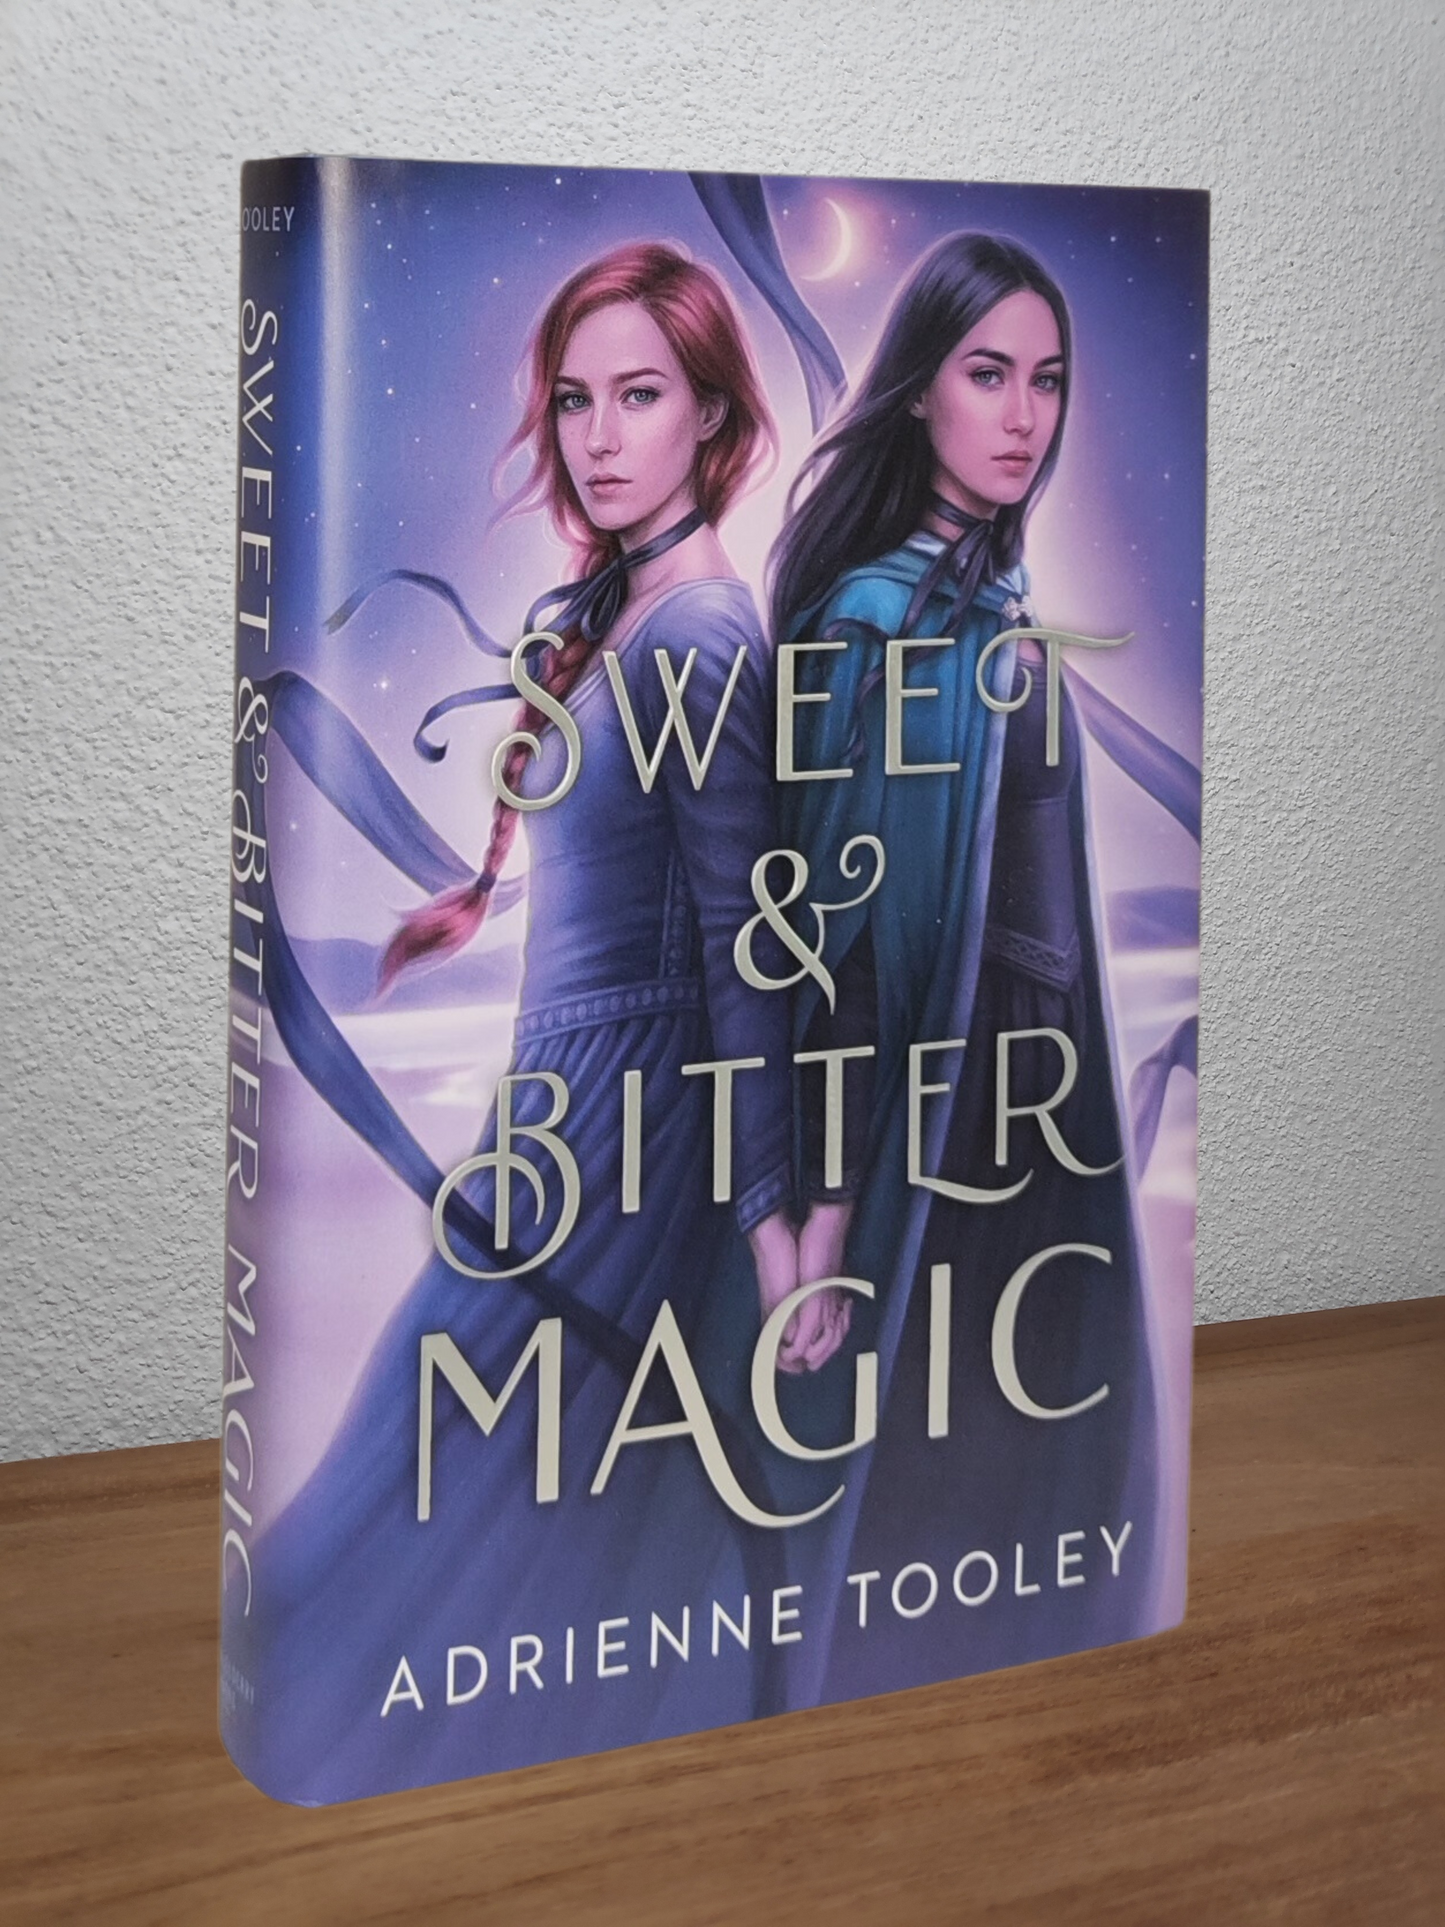 Adrienne Tooley - Sweet & Bitter Magic - Second-hand english book to deliver in Zurich & Switzerland